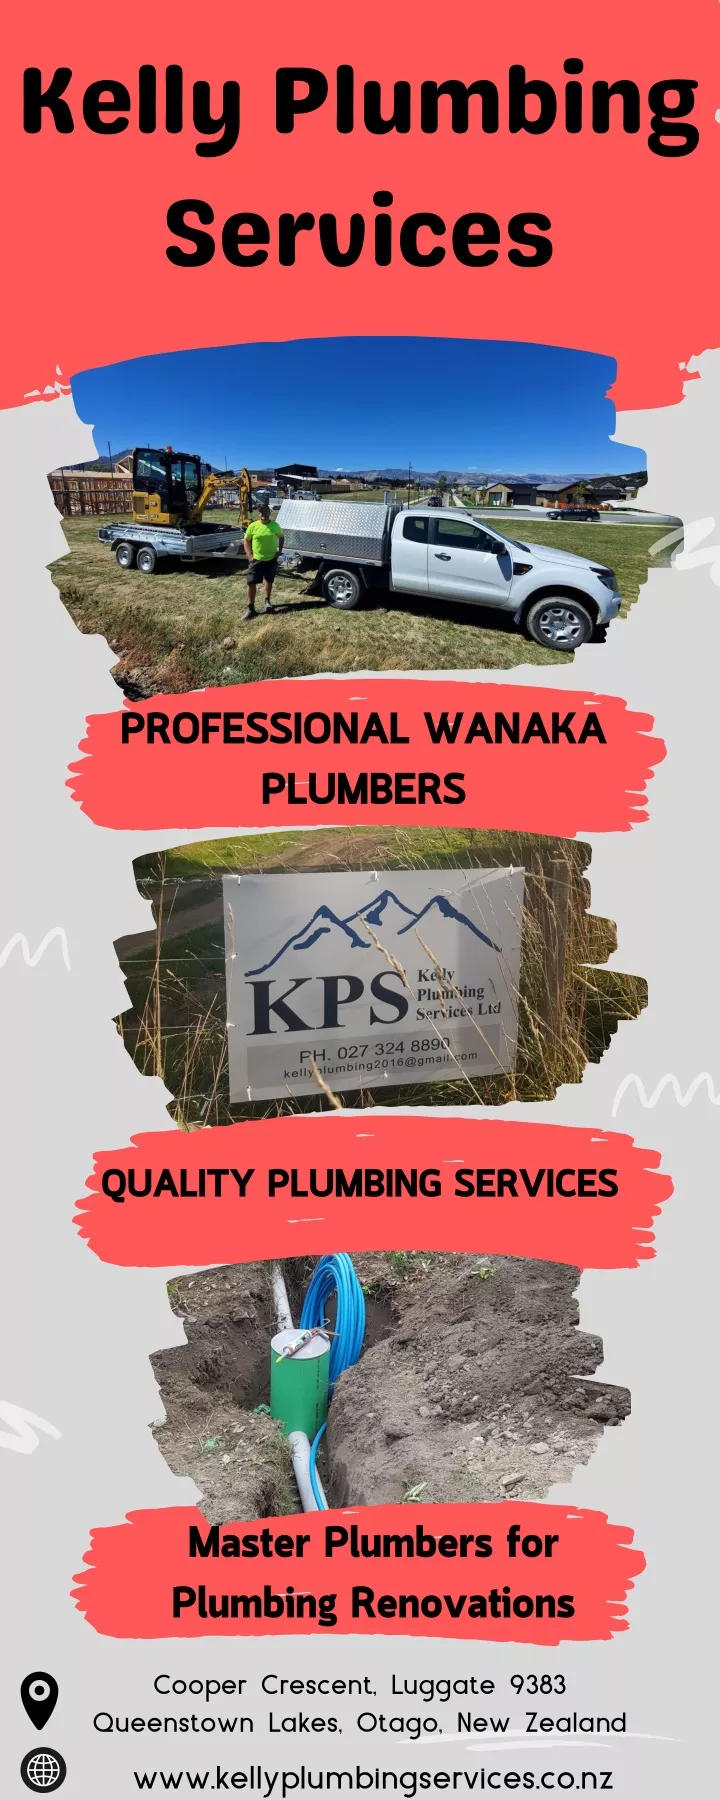 kelly plumbing services